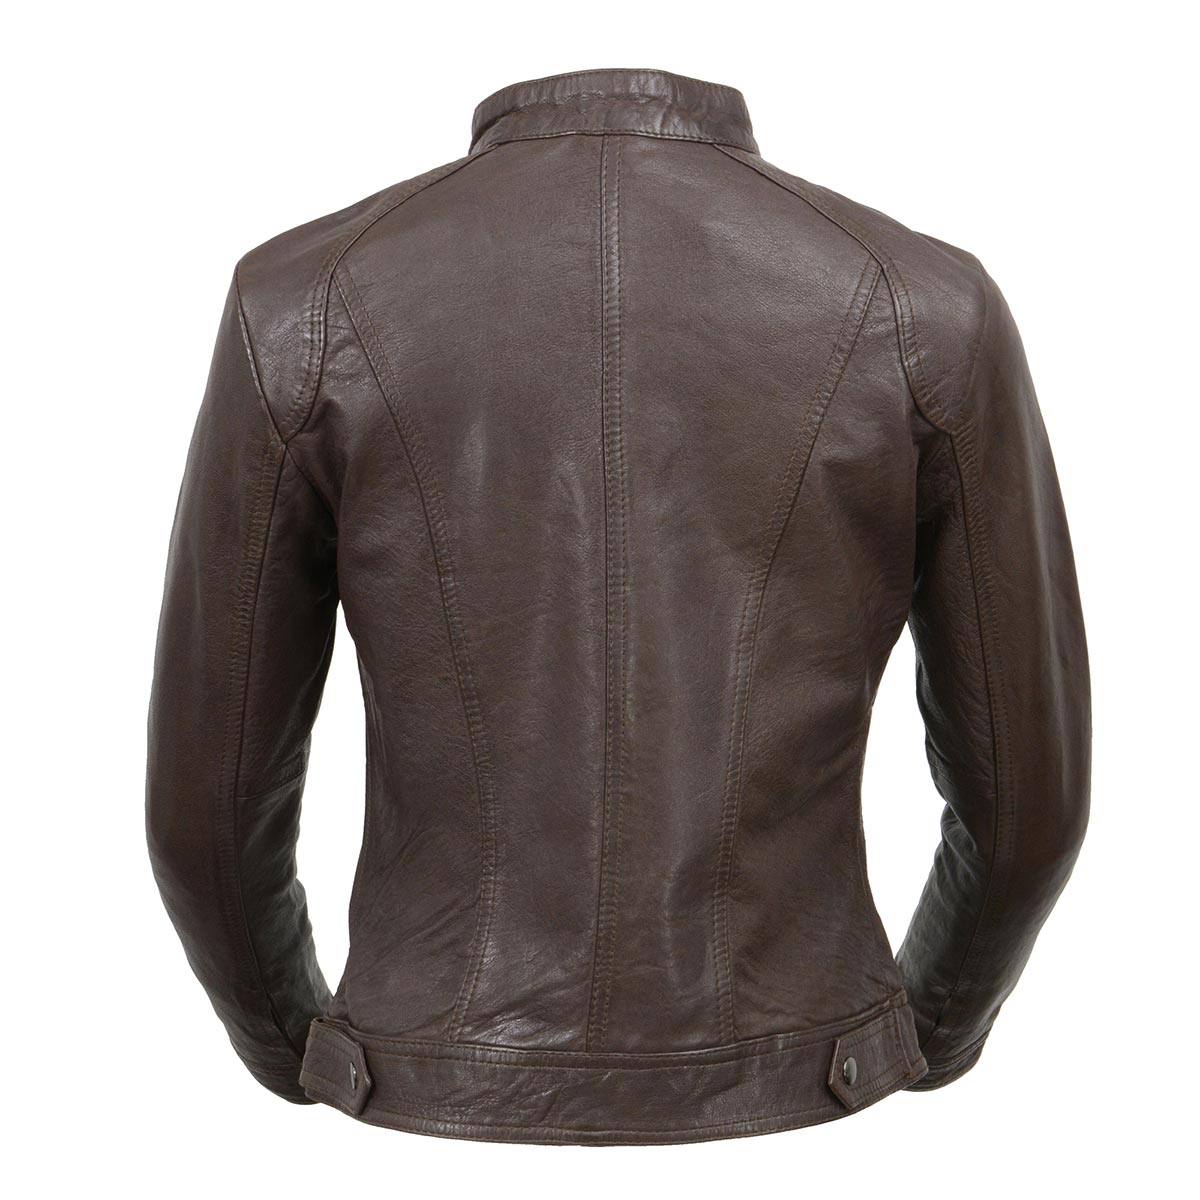 Milwaukee Leather Vintage SFL2811 Women's Brown Zipper Front Motorcycle Casual Fashion Leather Jacket